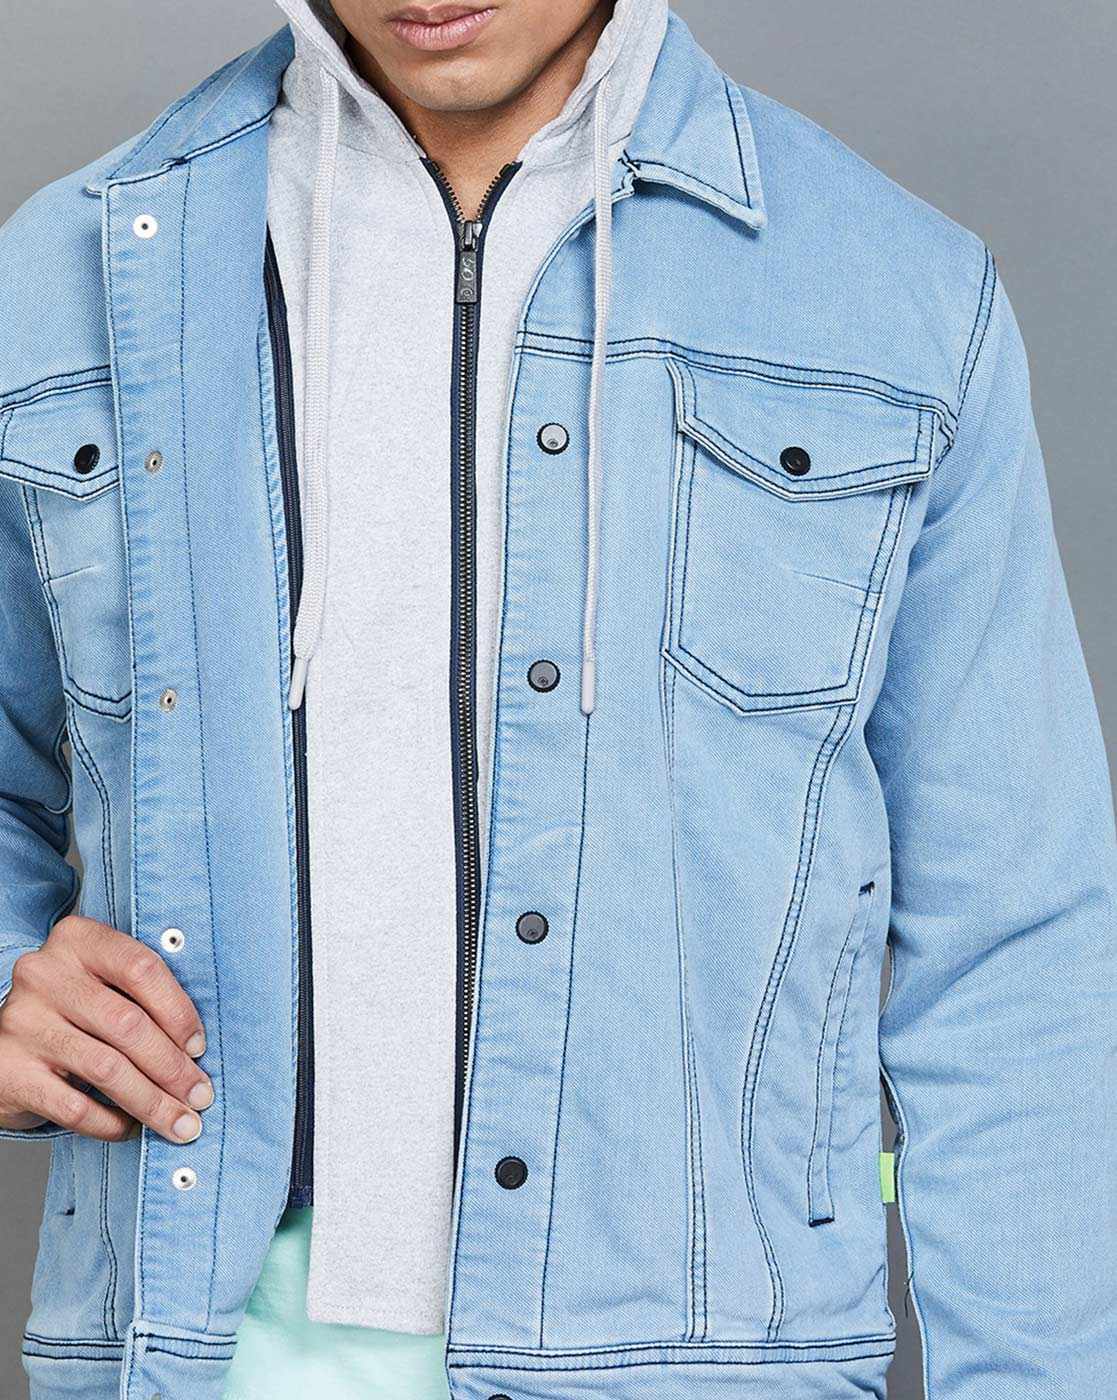 Take A Look At Some Of Shah Rukh Khan's Most Iconic Denim Jacket Moments